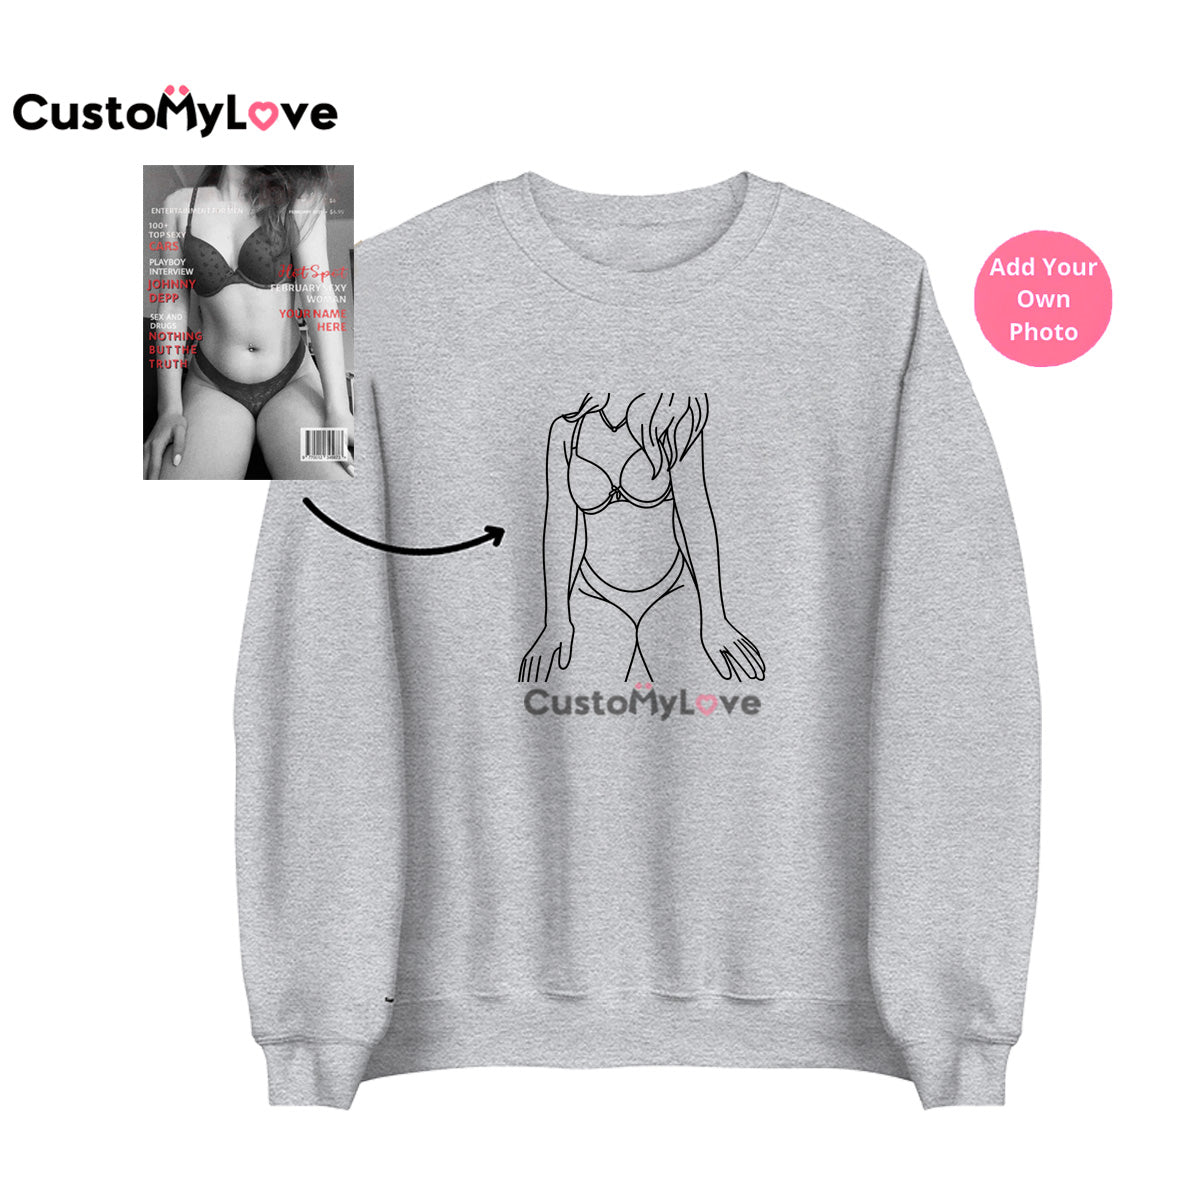 50% OFF😍Personalized Spicy Hoodie💕Crewneck-Valentine Gift for Him